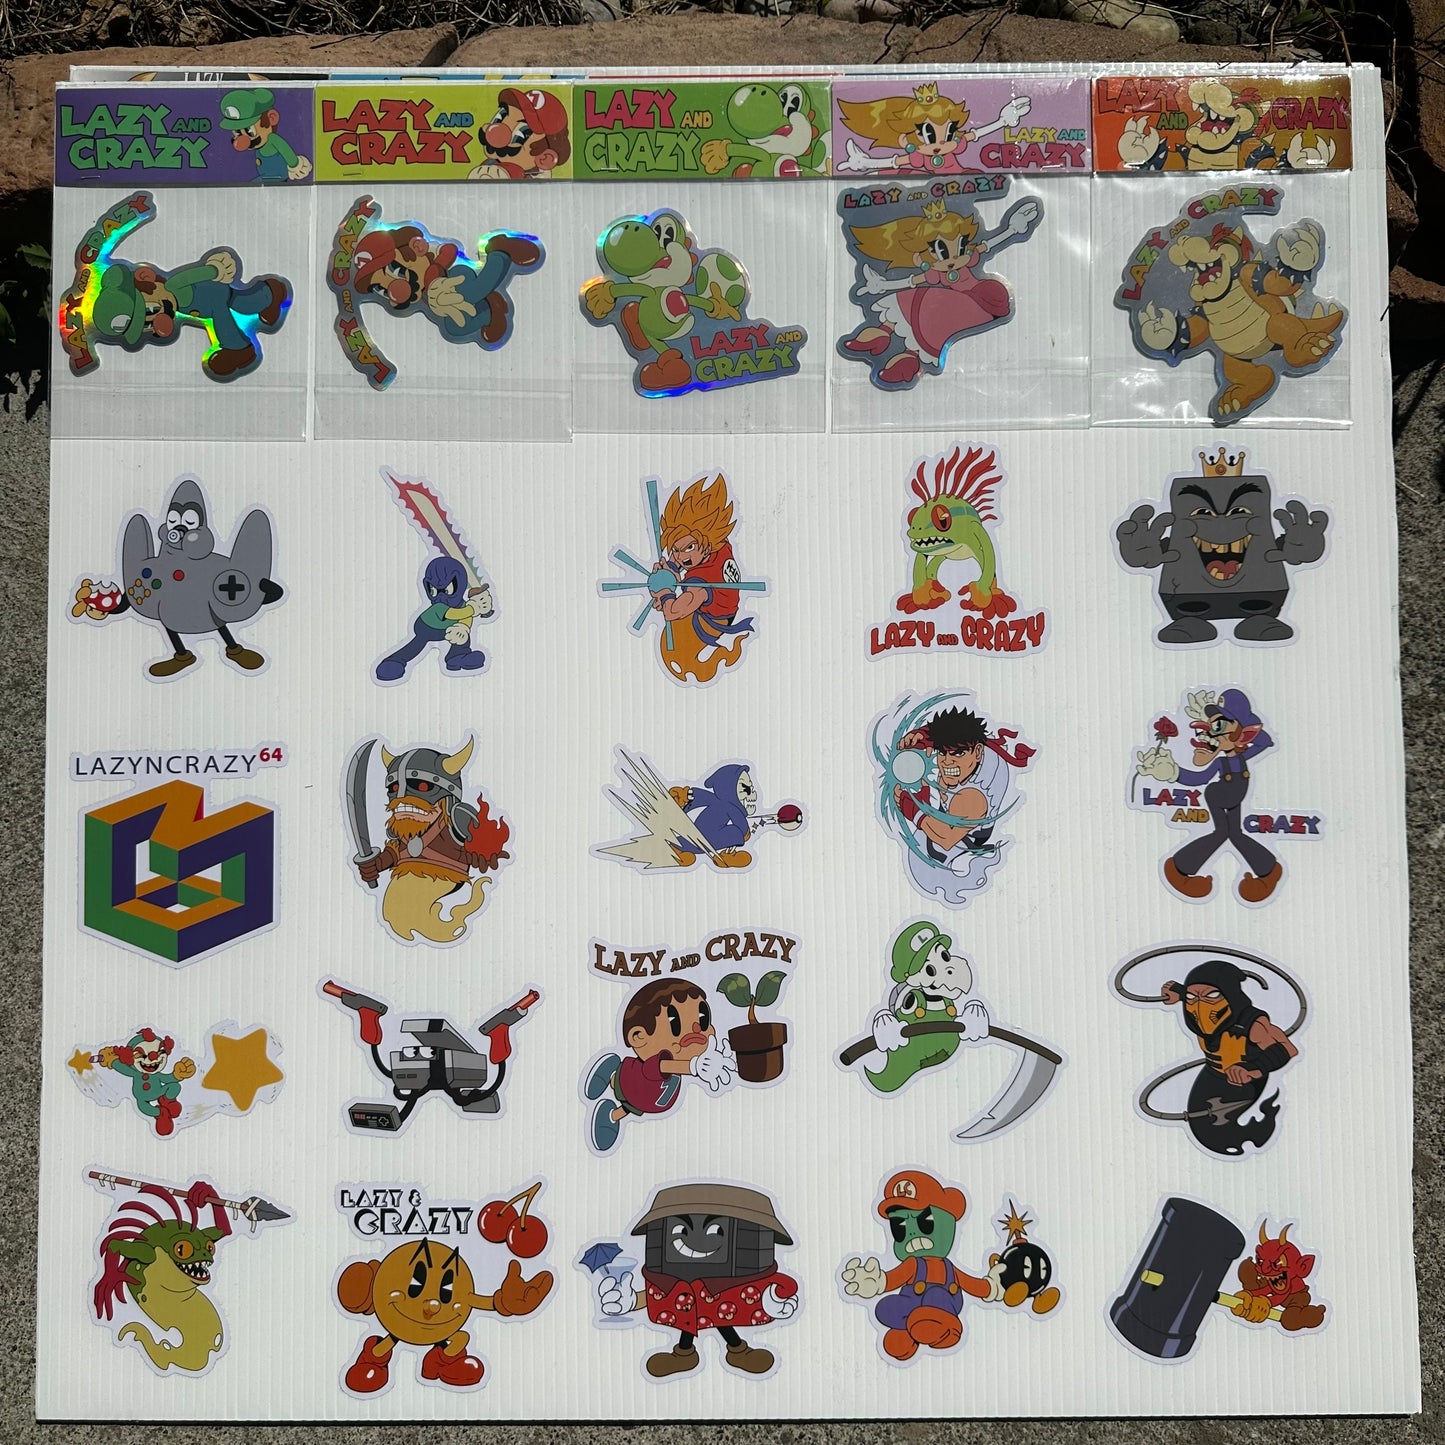 GAMING STICKER PACKS! (Ships today)